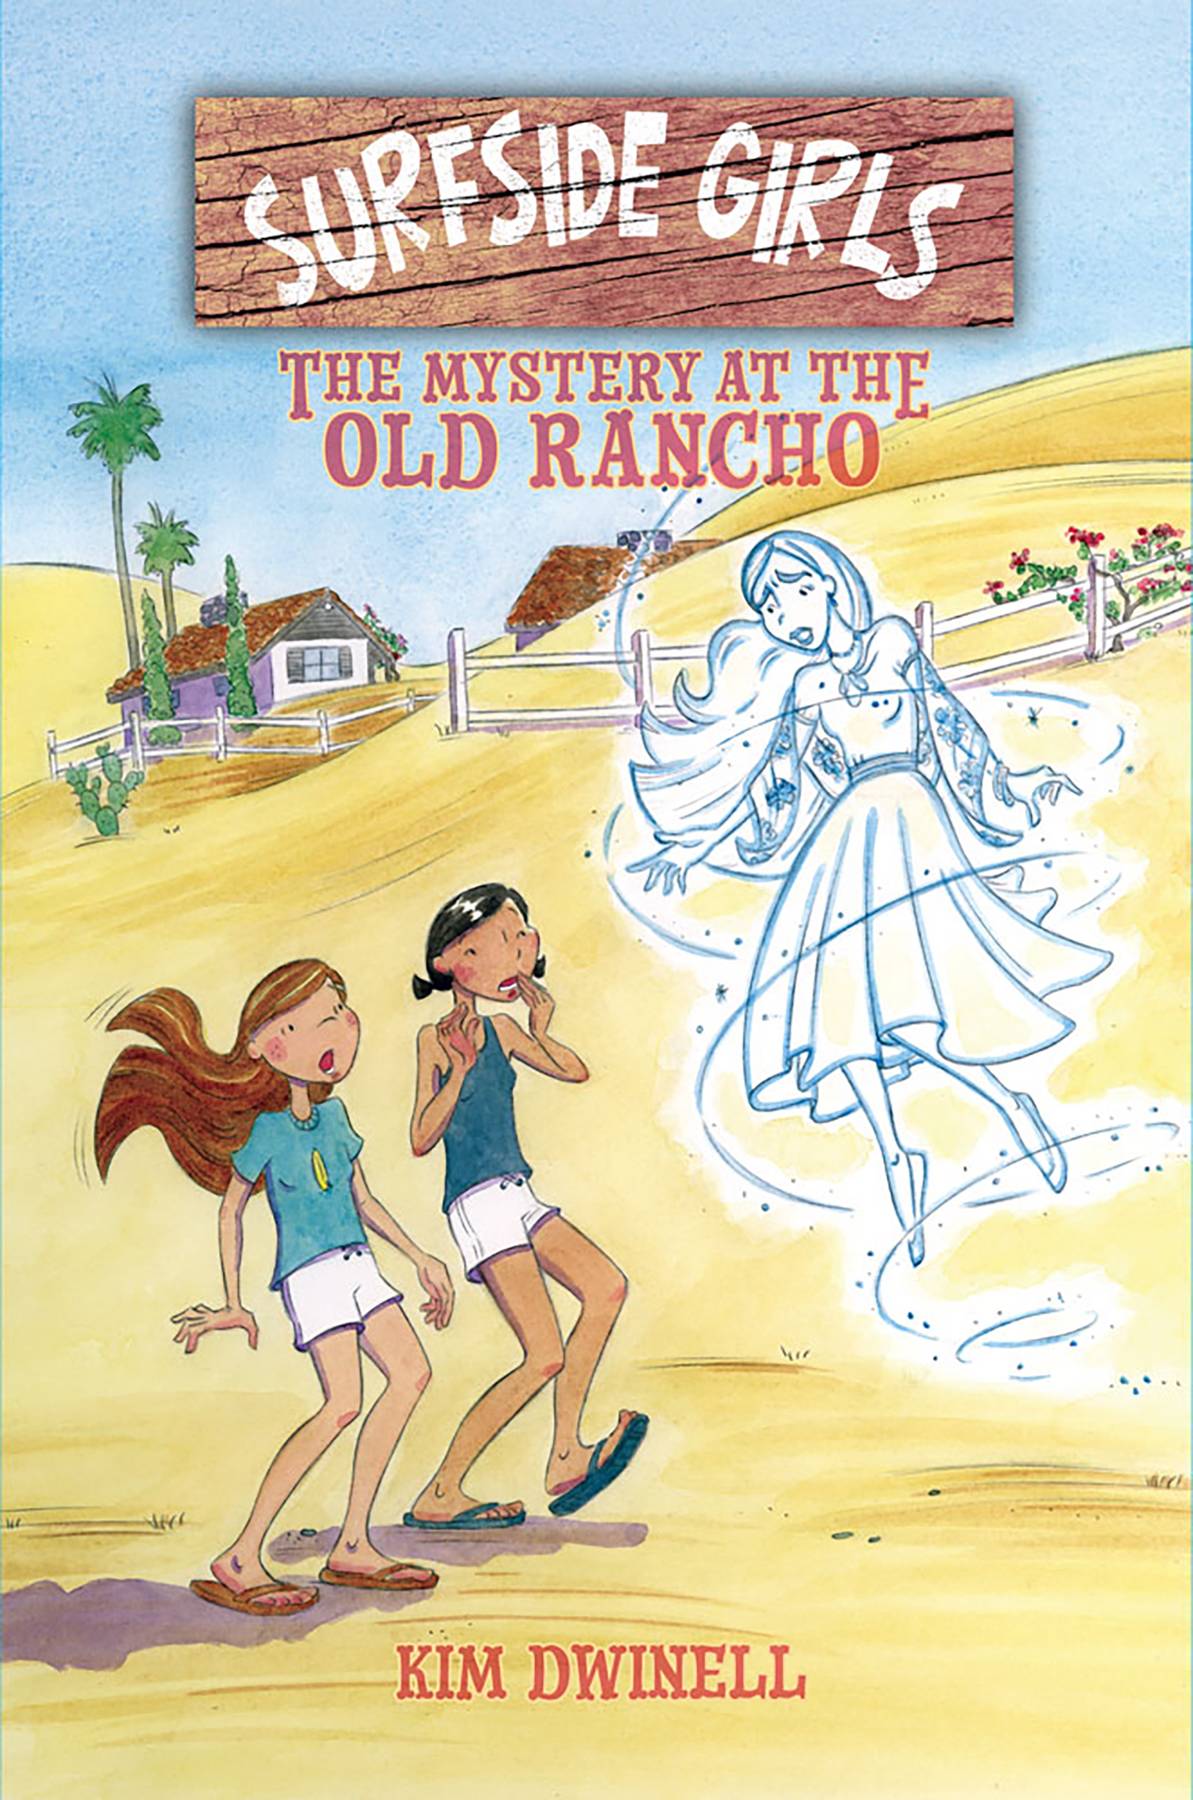 Surfside Girls Vol. 02 Mystery At Old Rancho